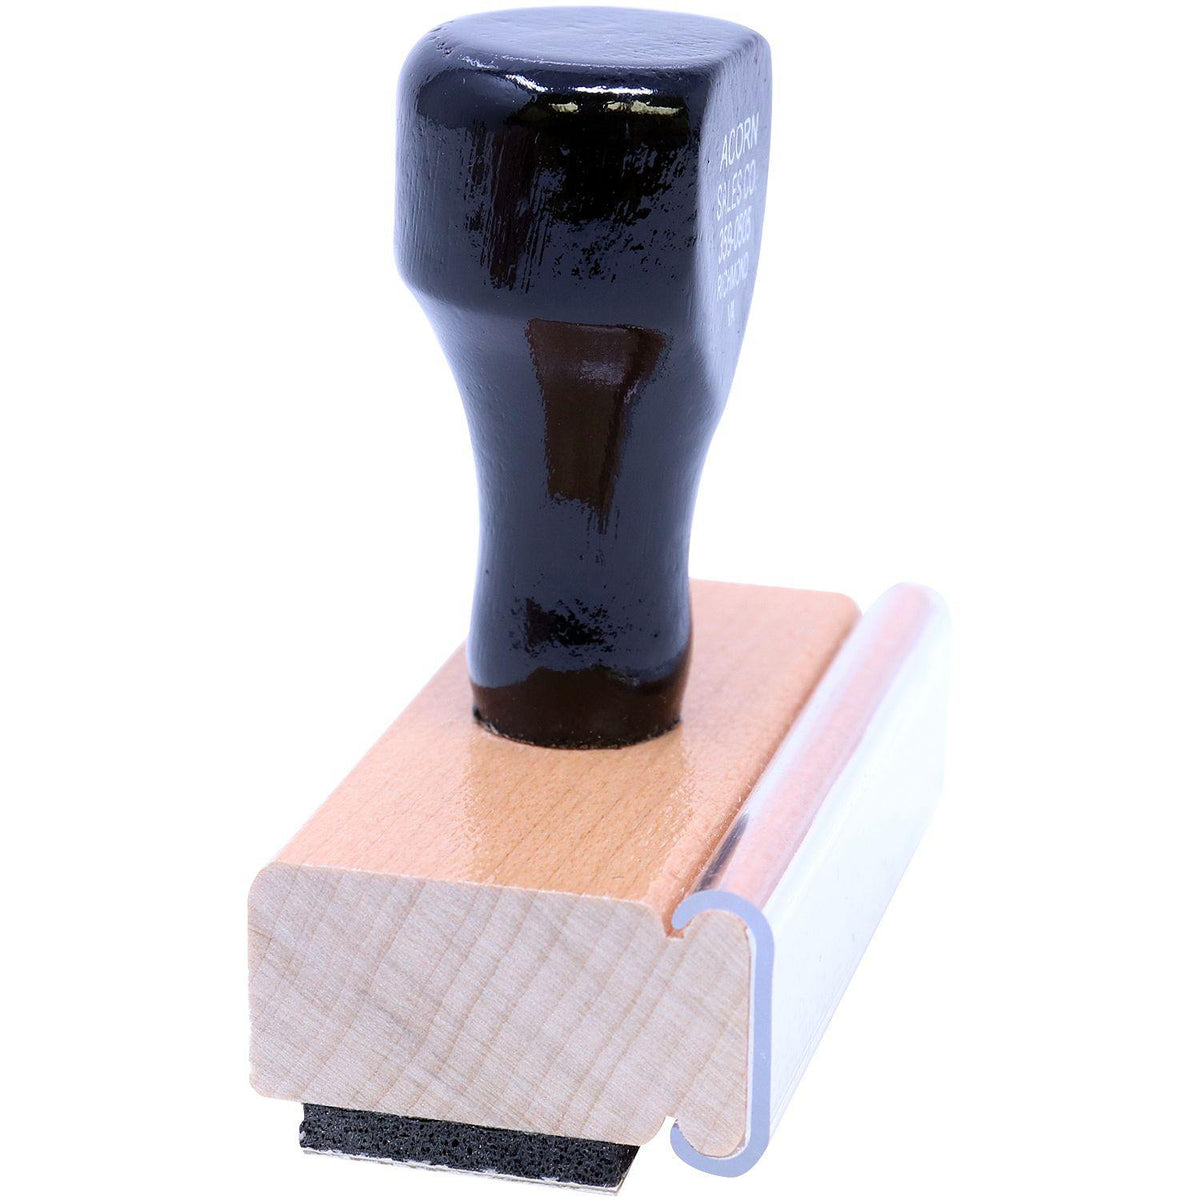 Side View of Large Completed with Checkbox Rubber Stamp at an Angle